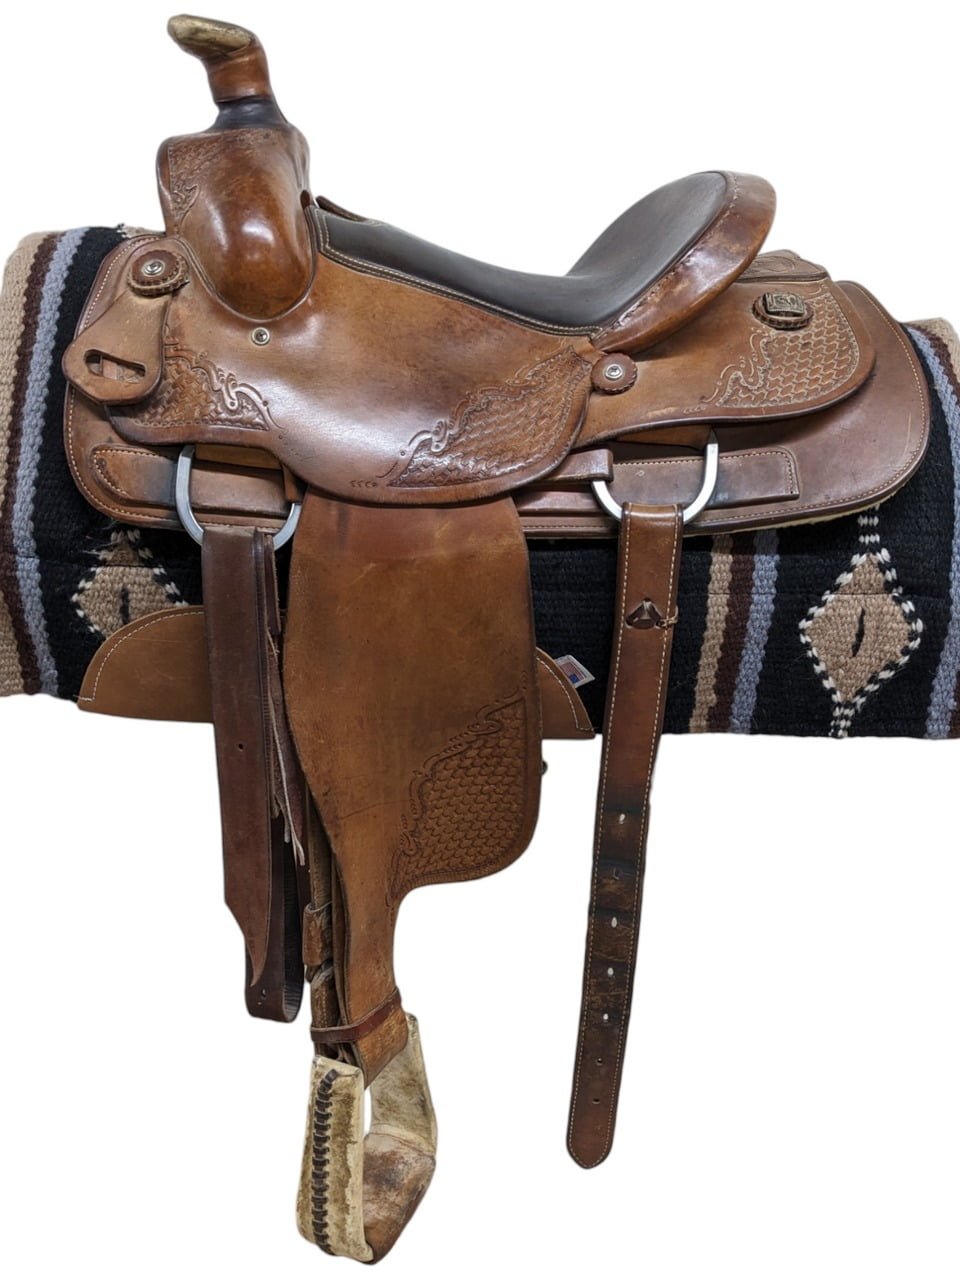 Consider this used McCall roper. This saddle features a padded seat for comfort and smooth leather. The saddle is accented by basket stamp and filigree tooling. Comes with a rear cinch.  Features: Weight: Approx. 48 lbs Gullet: 6.75" mid-concho to mid concho Finished Seat Size: 14" Skirt Length: 27" Tree Size: 14.5"